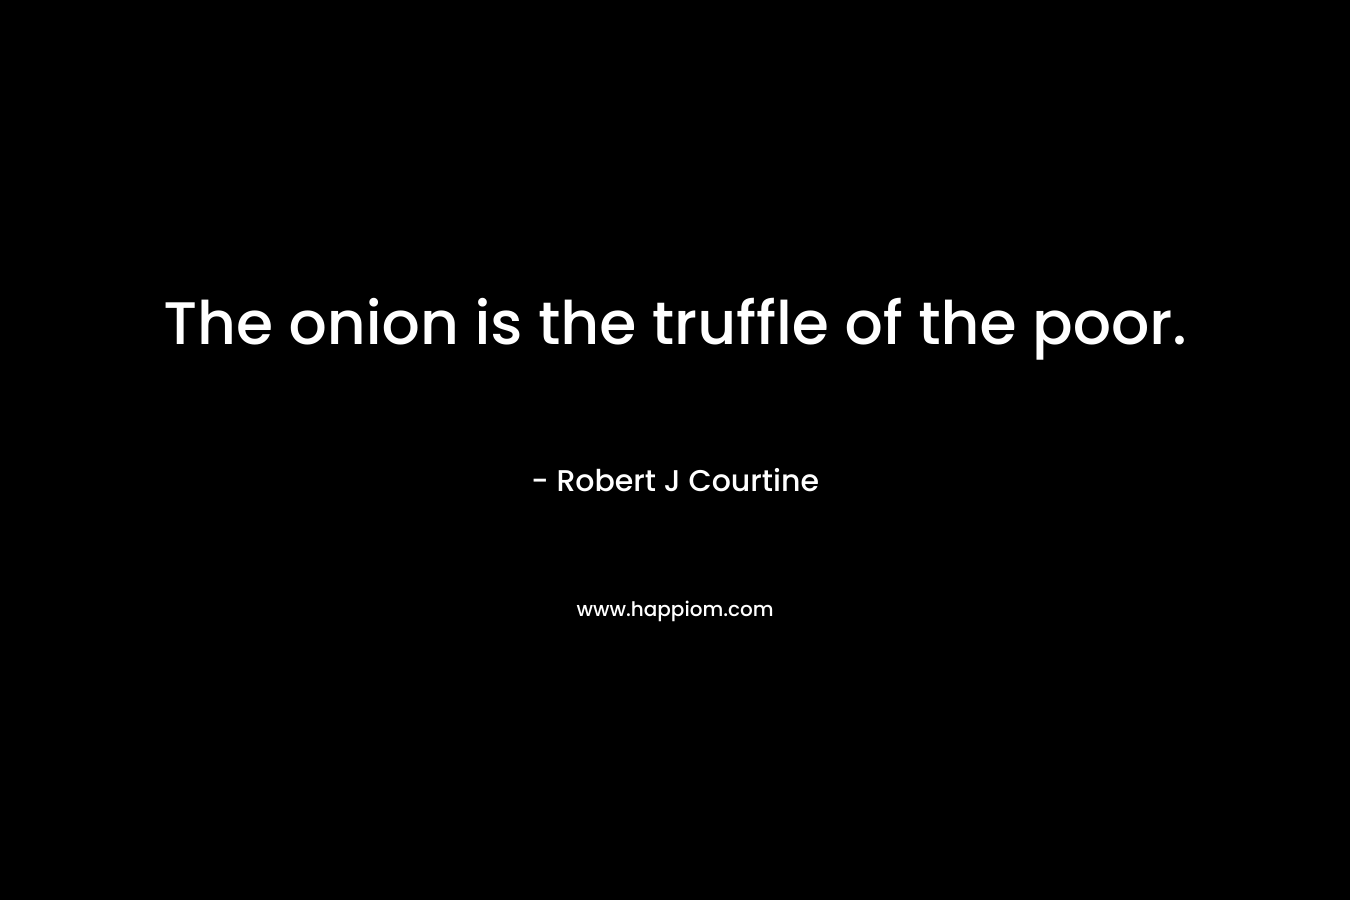 The onion is the truffle of the poor. – Robert J Courtine